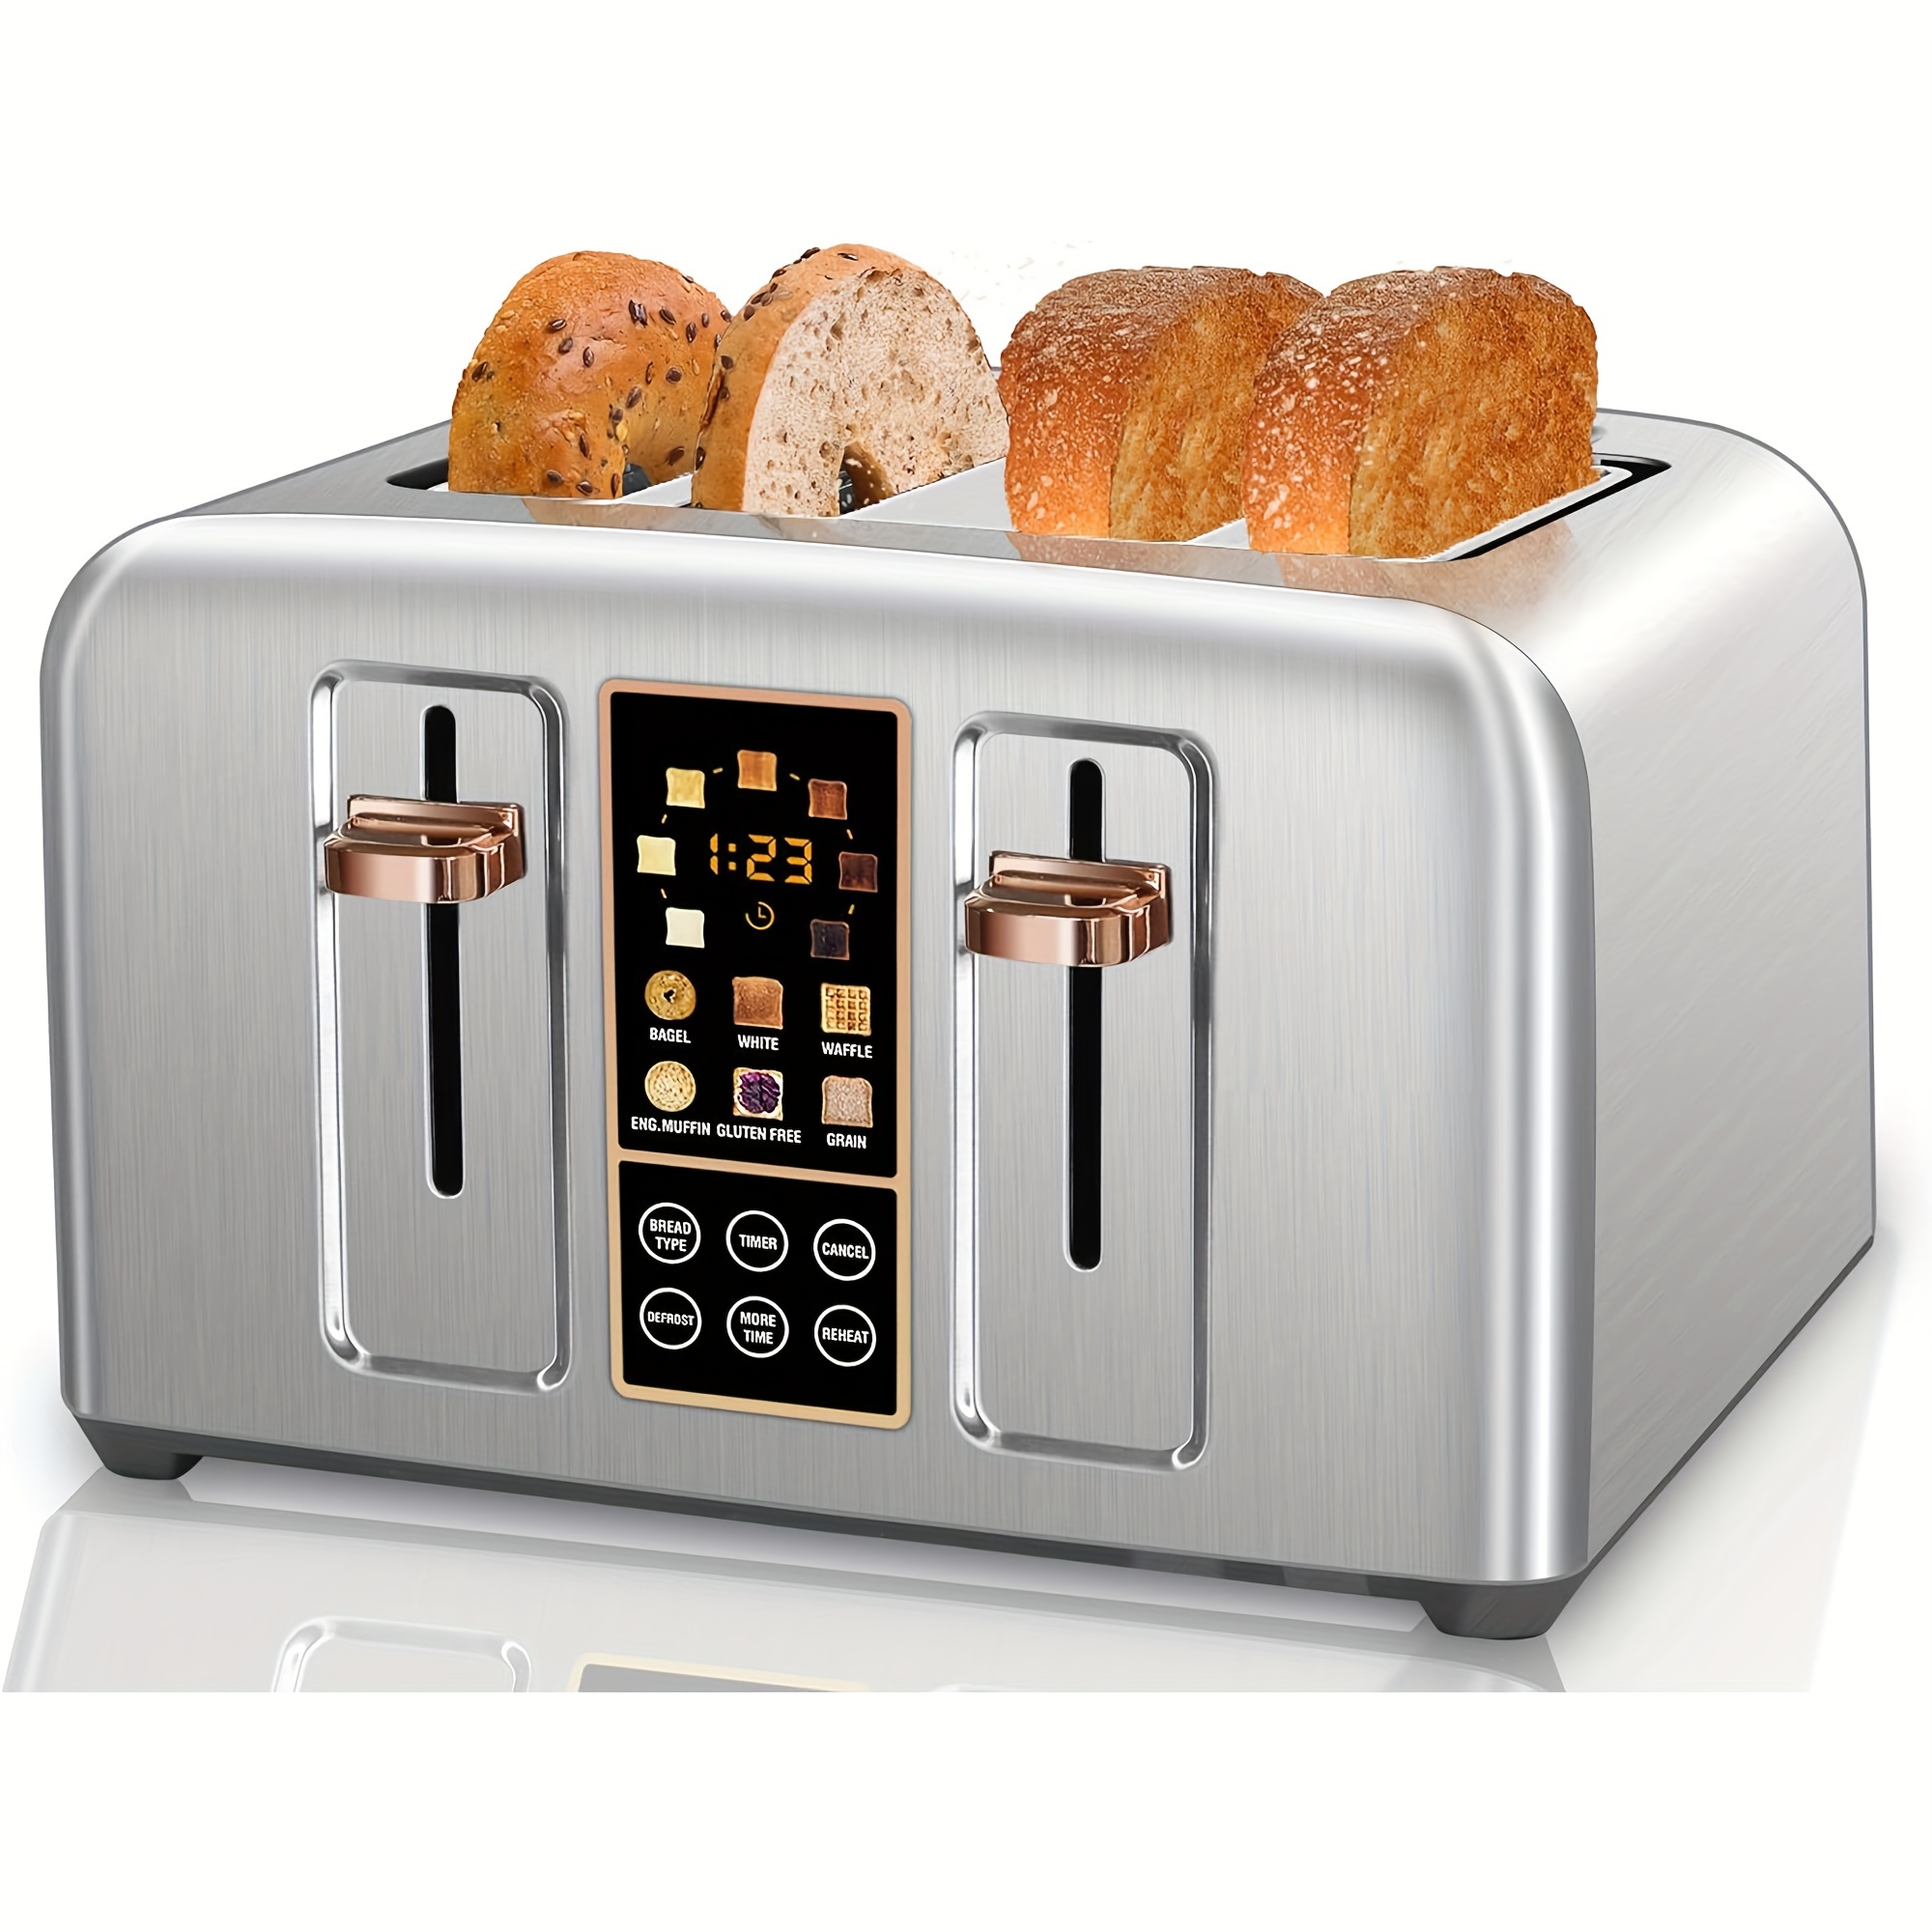 

Toaster 4 , Stainless Toaster Lcd Display, Touch Buttons, 6 Bread Selection, 7 Shade Settings, 1.4''wide Slots Toaster Cancel, Defrost, Reheat, Removable Crumb Tray, 1800w